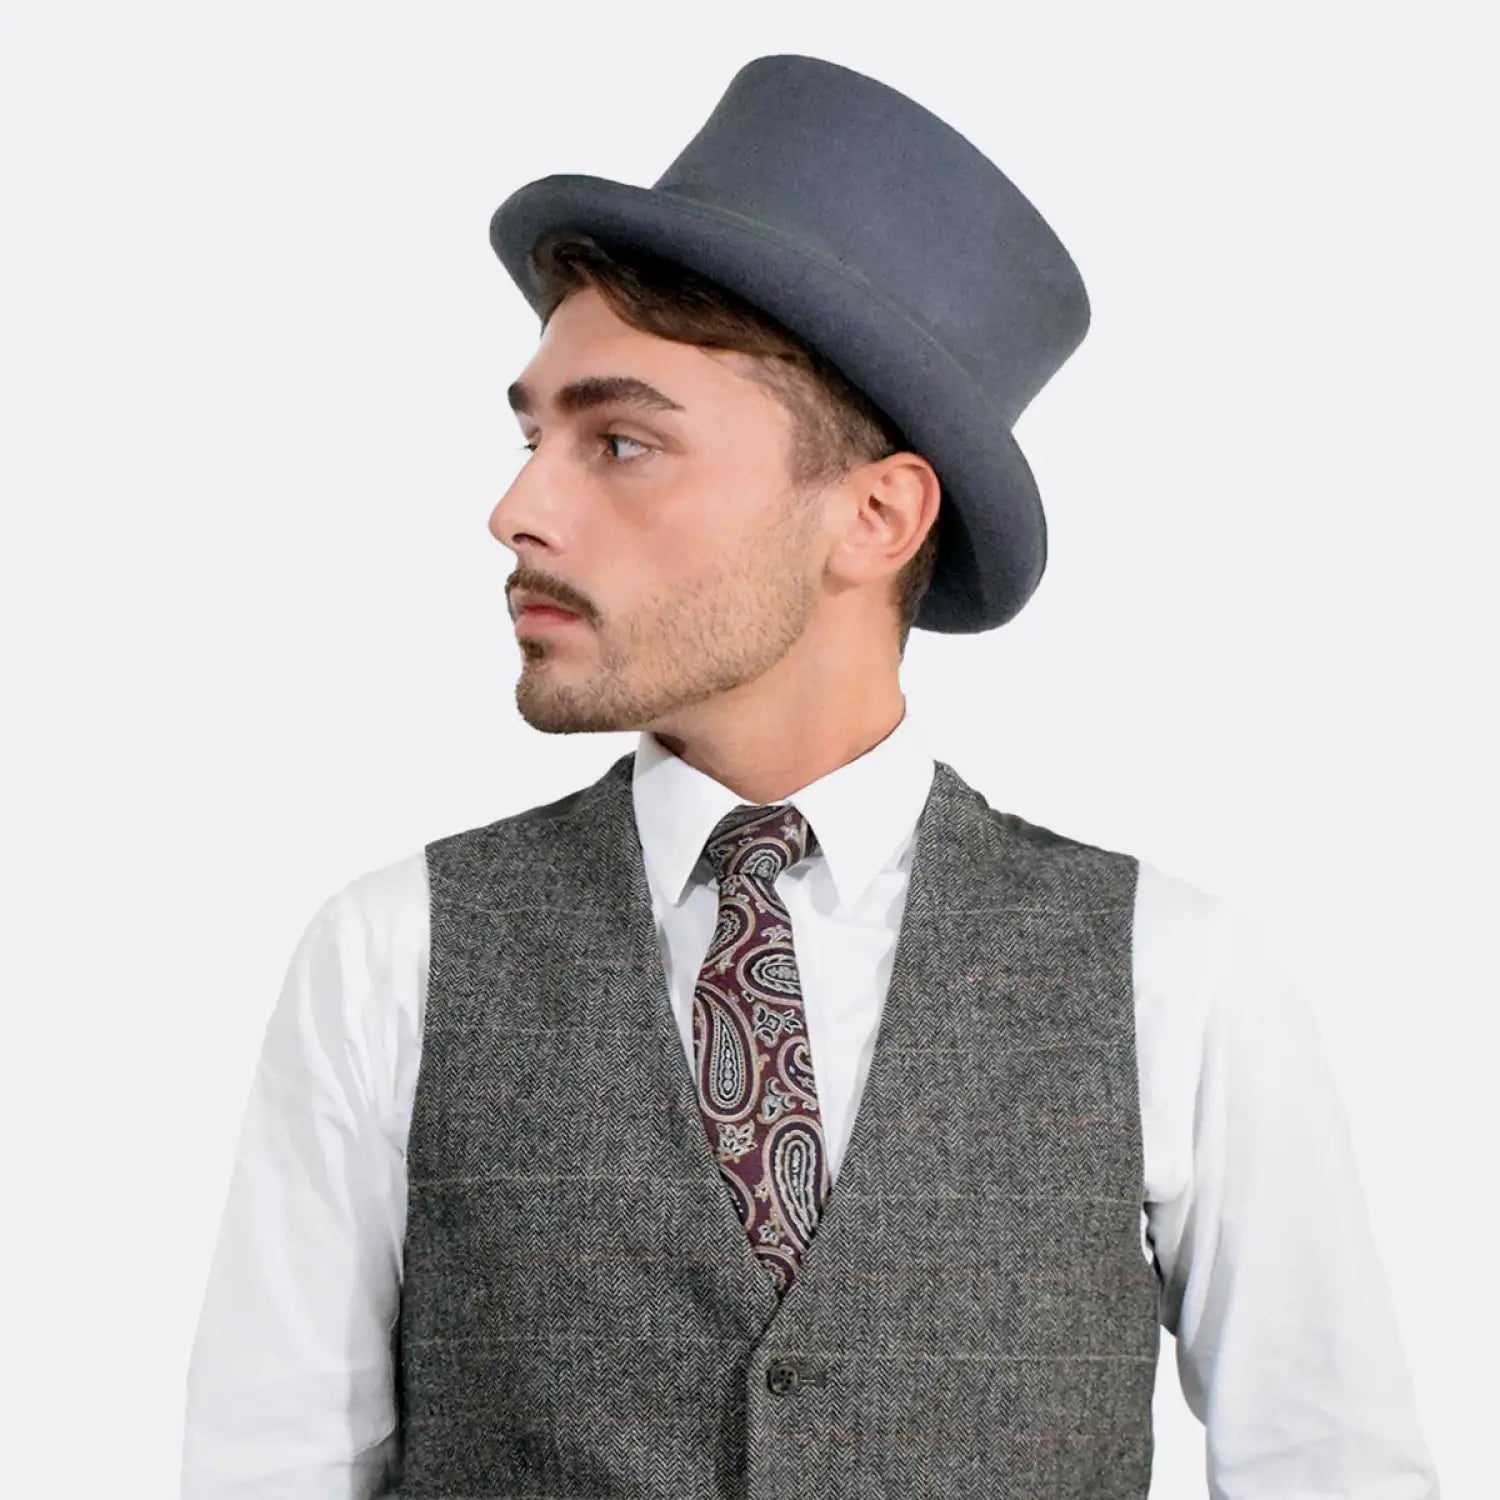 English men’s formal wool felt top hat worn by a man in grey vest and hat